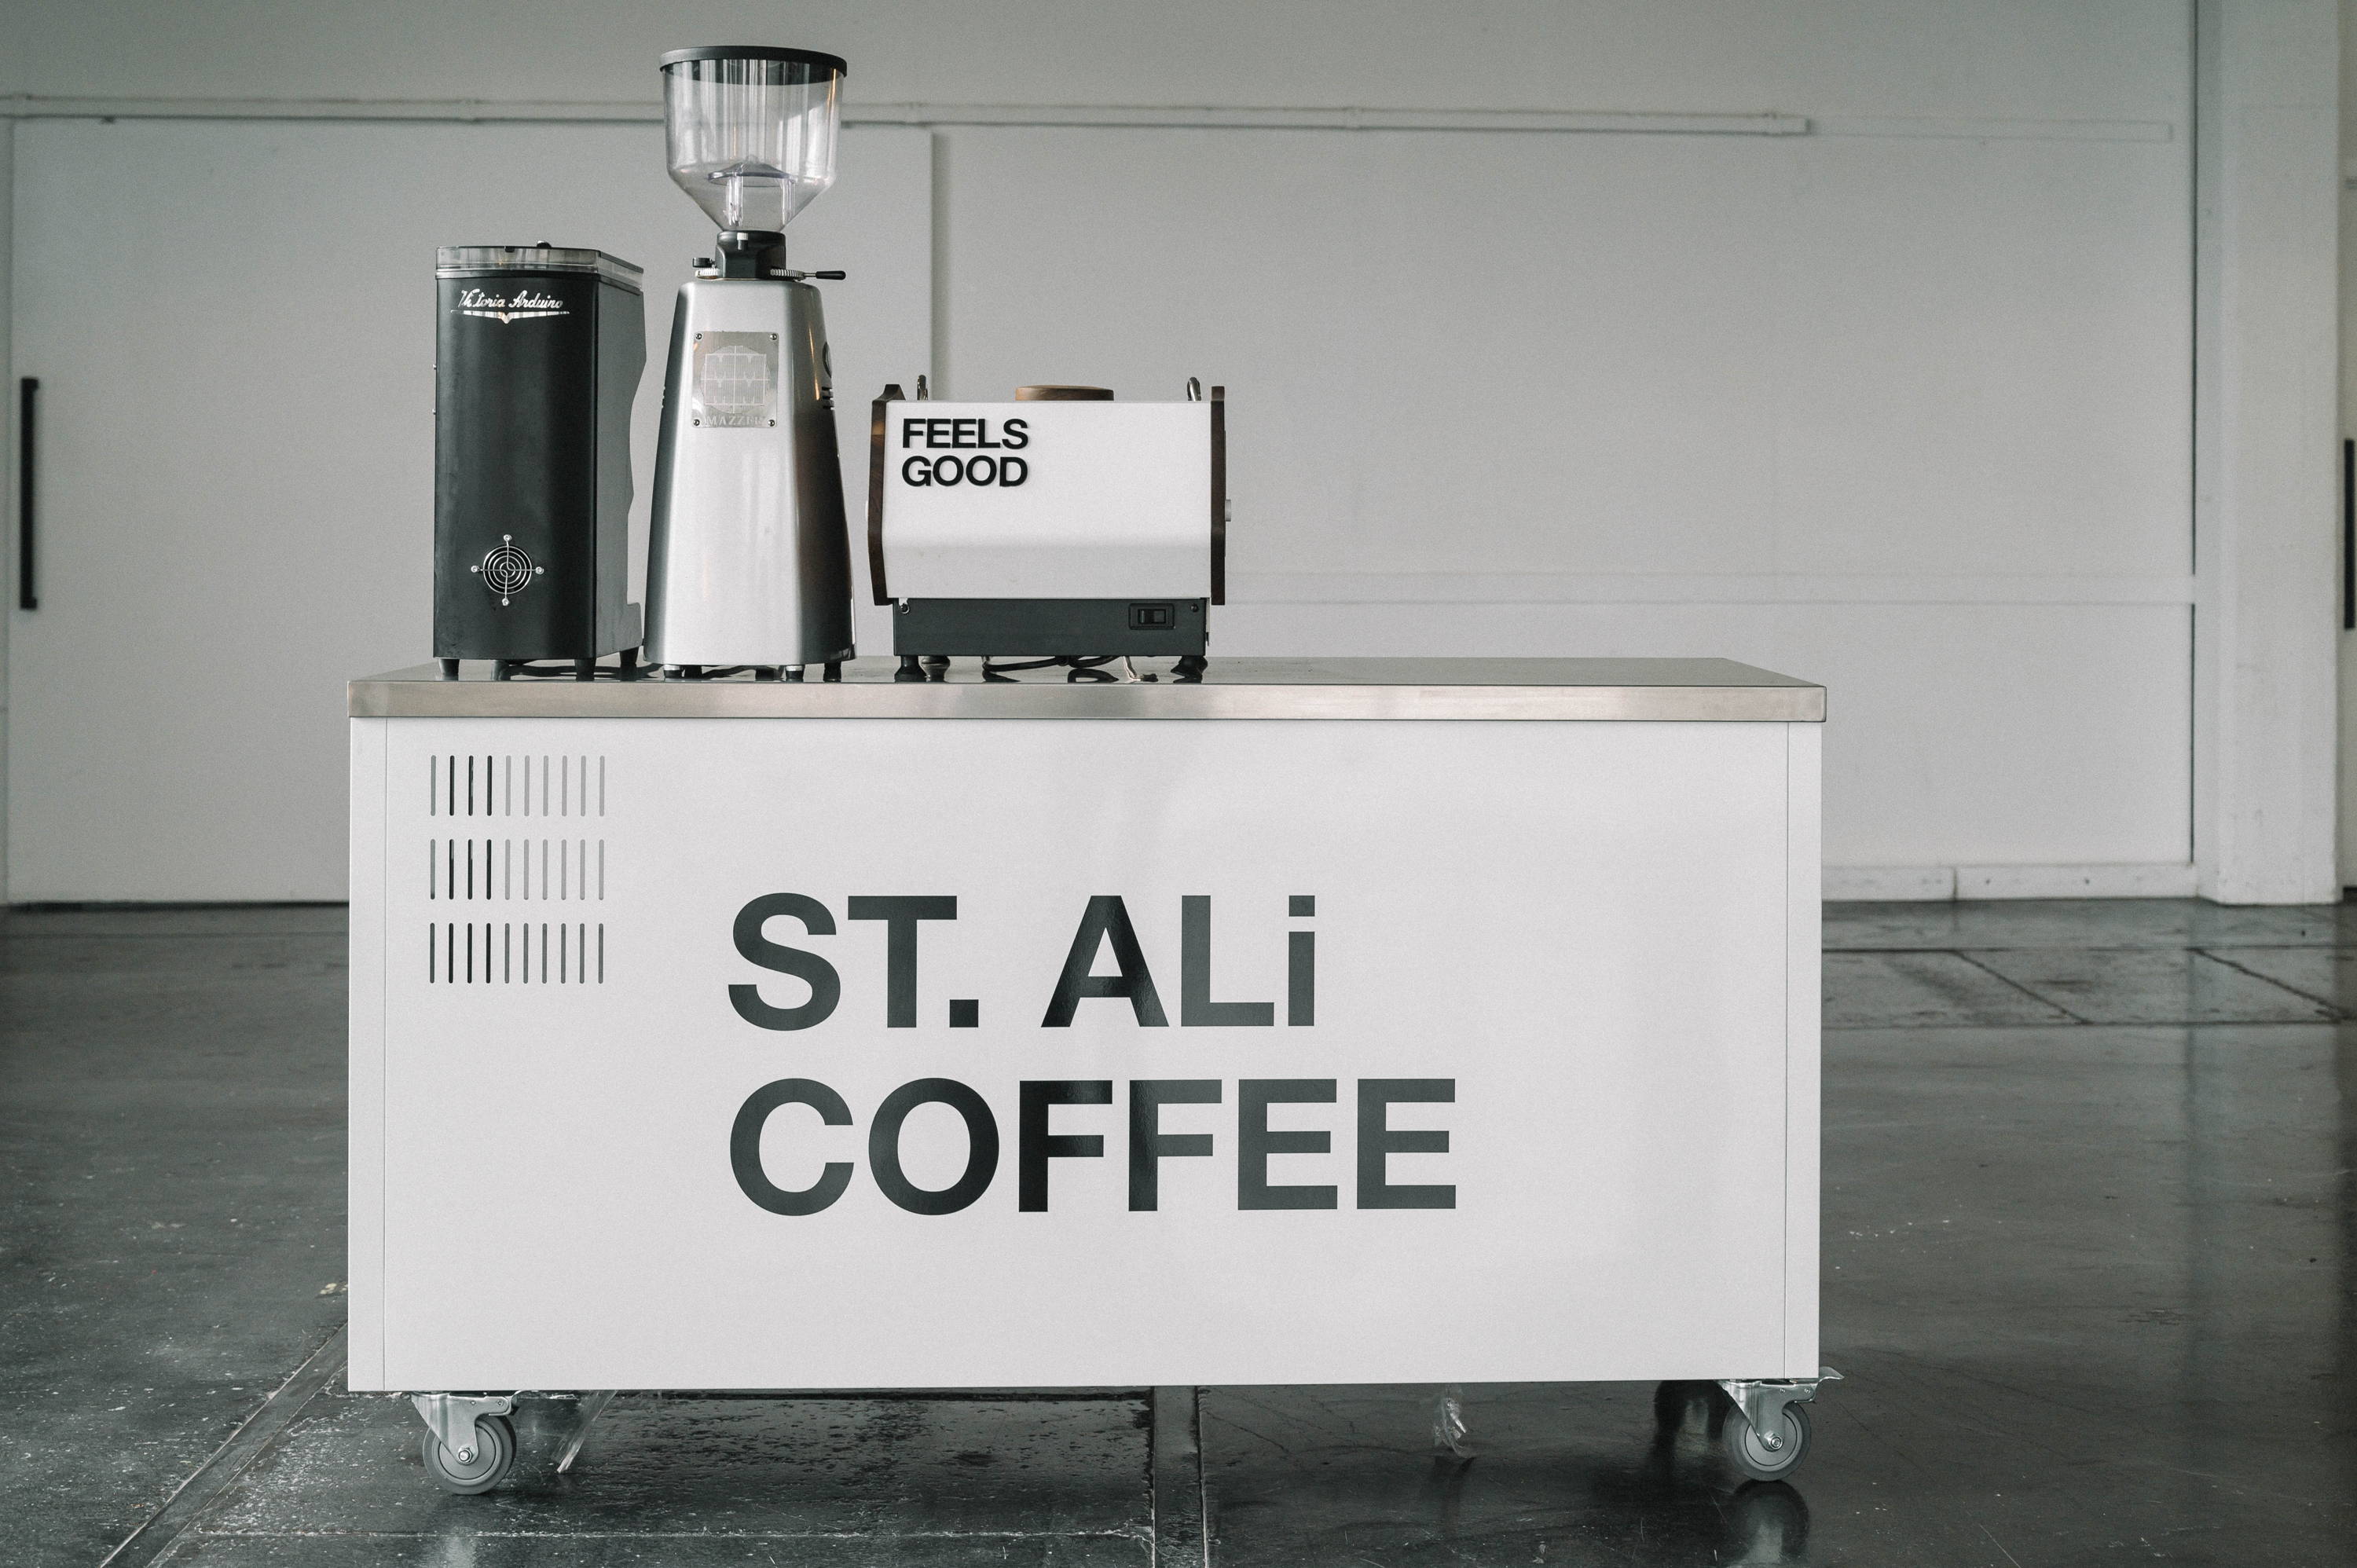 ST. ALI branded coffee tools and equipment